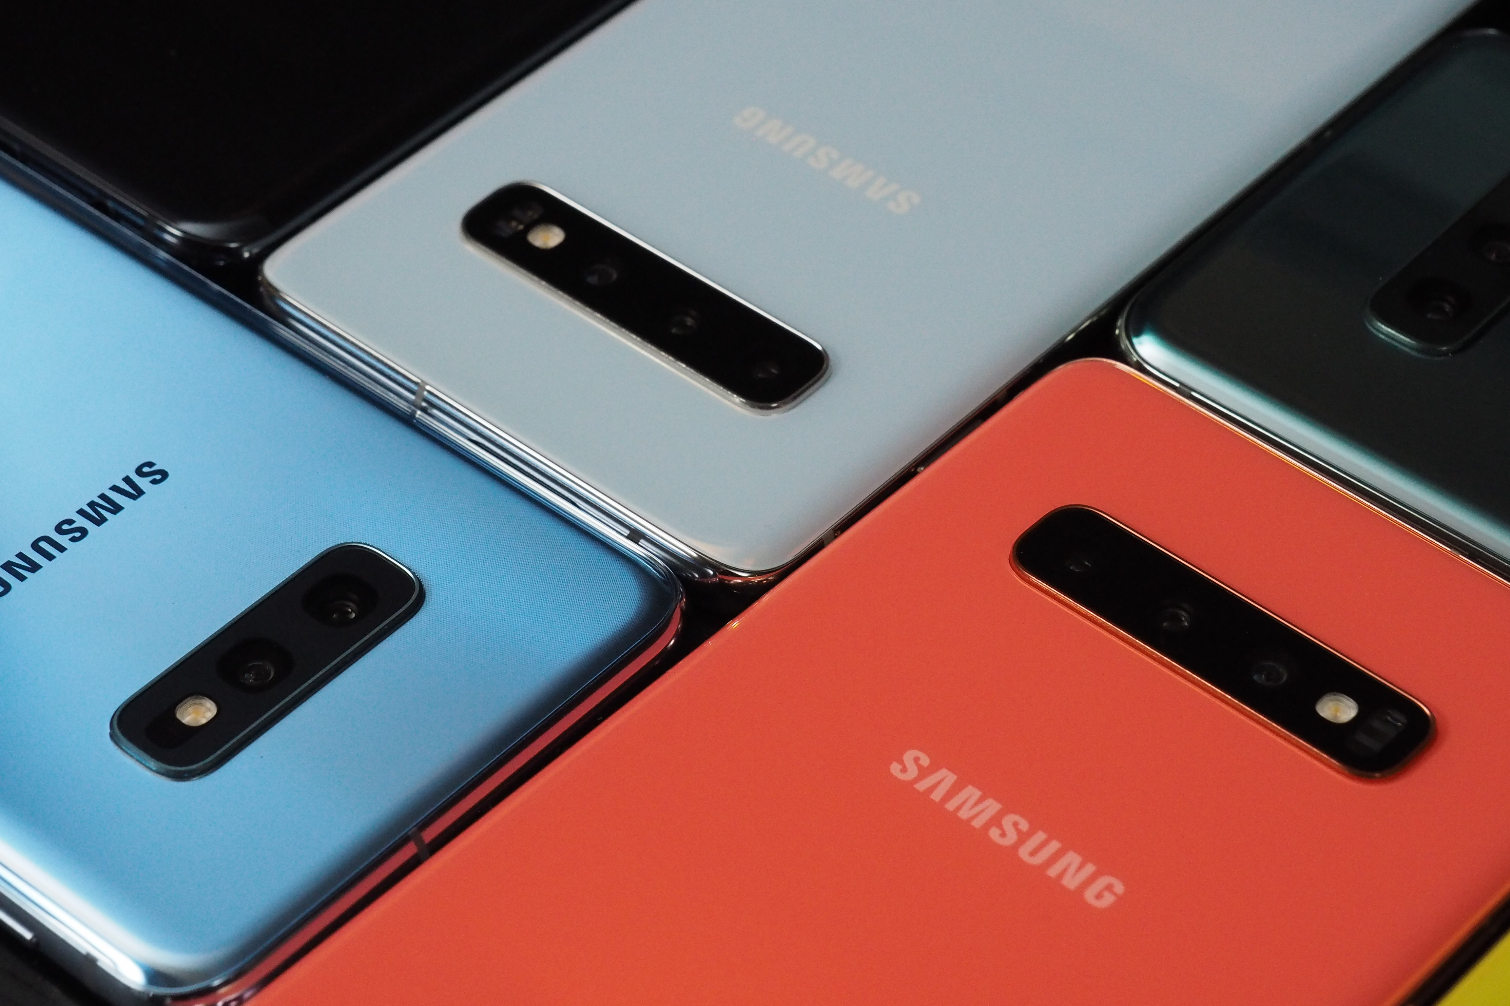 Galaxy S10 Galaxy S10 Plus And Galaxy S10e Specs Here S What You